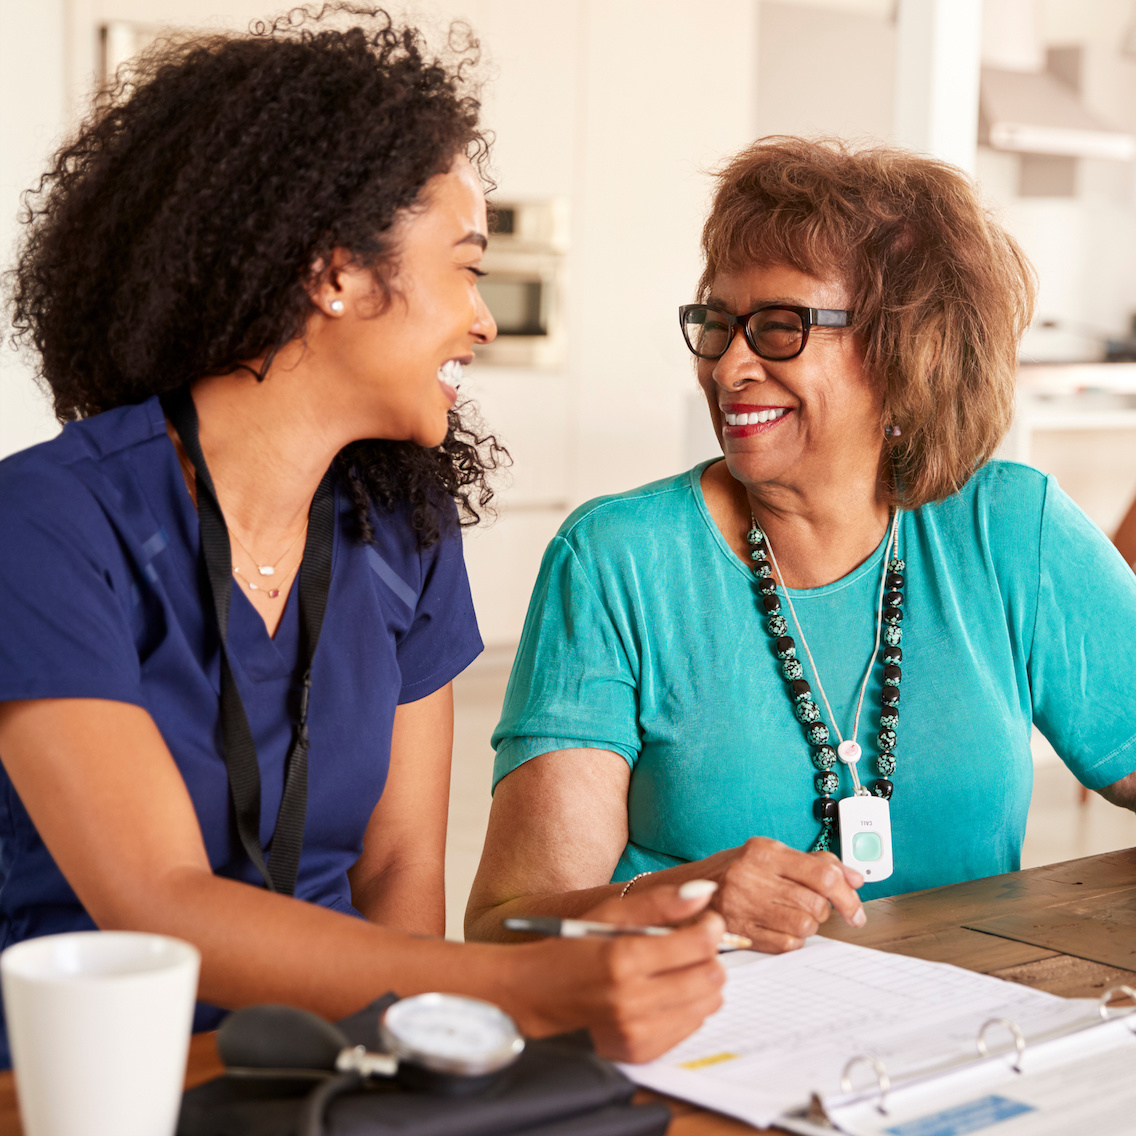 Female nurse sitting at table smiling with a senior woman during a home health visit